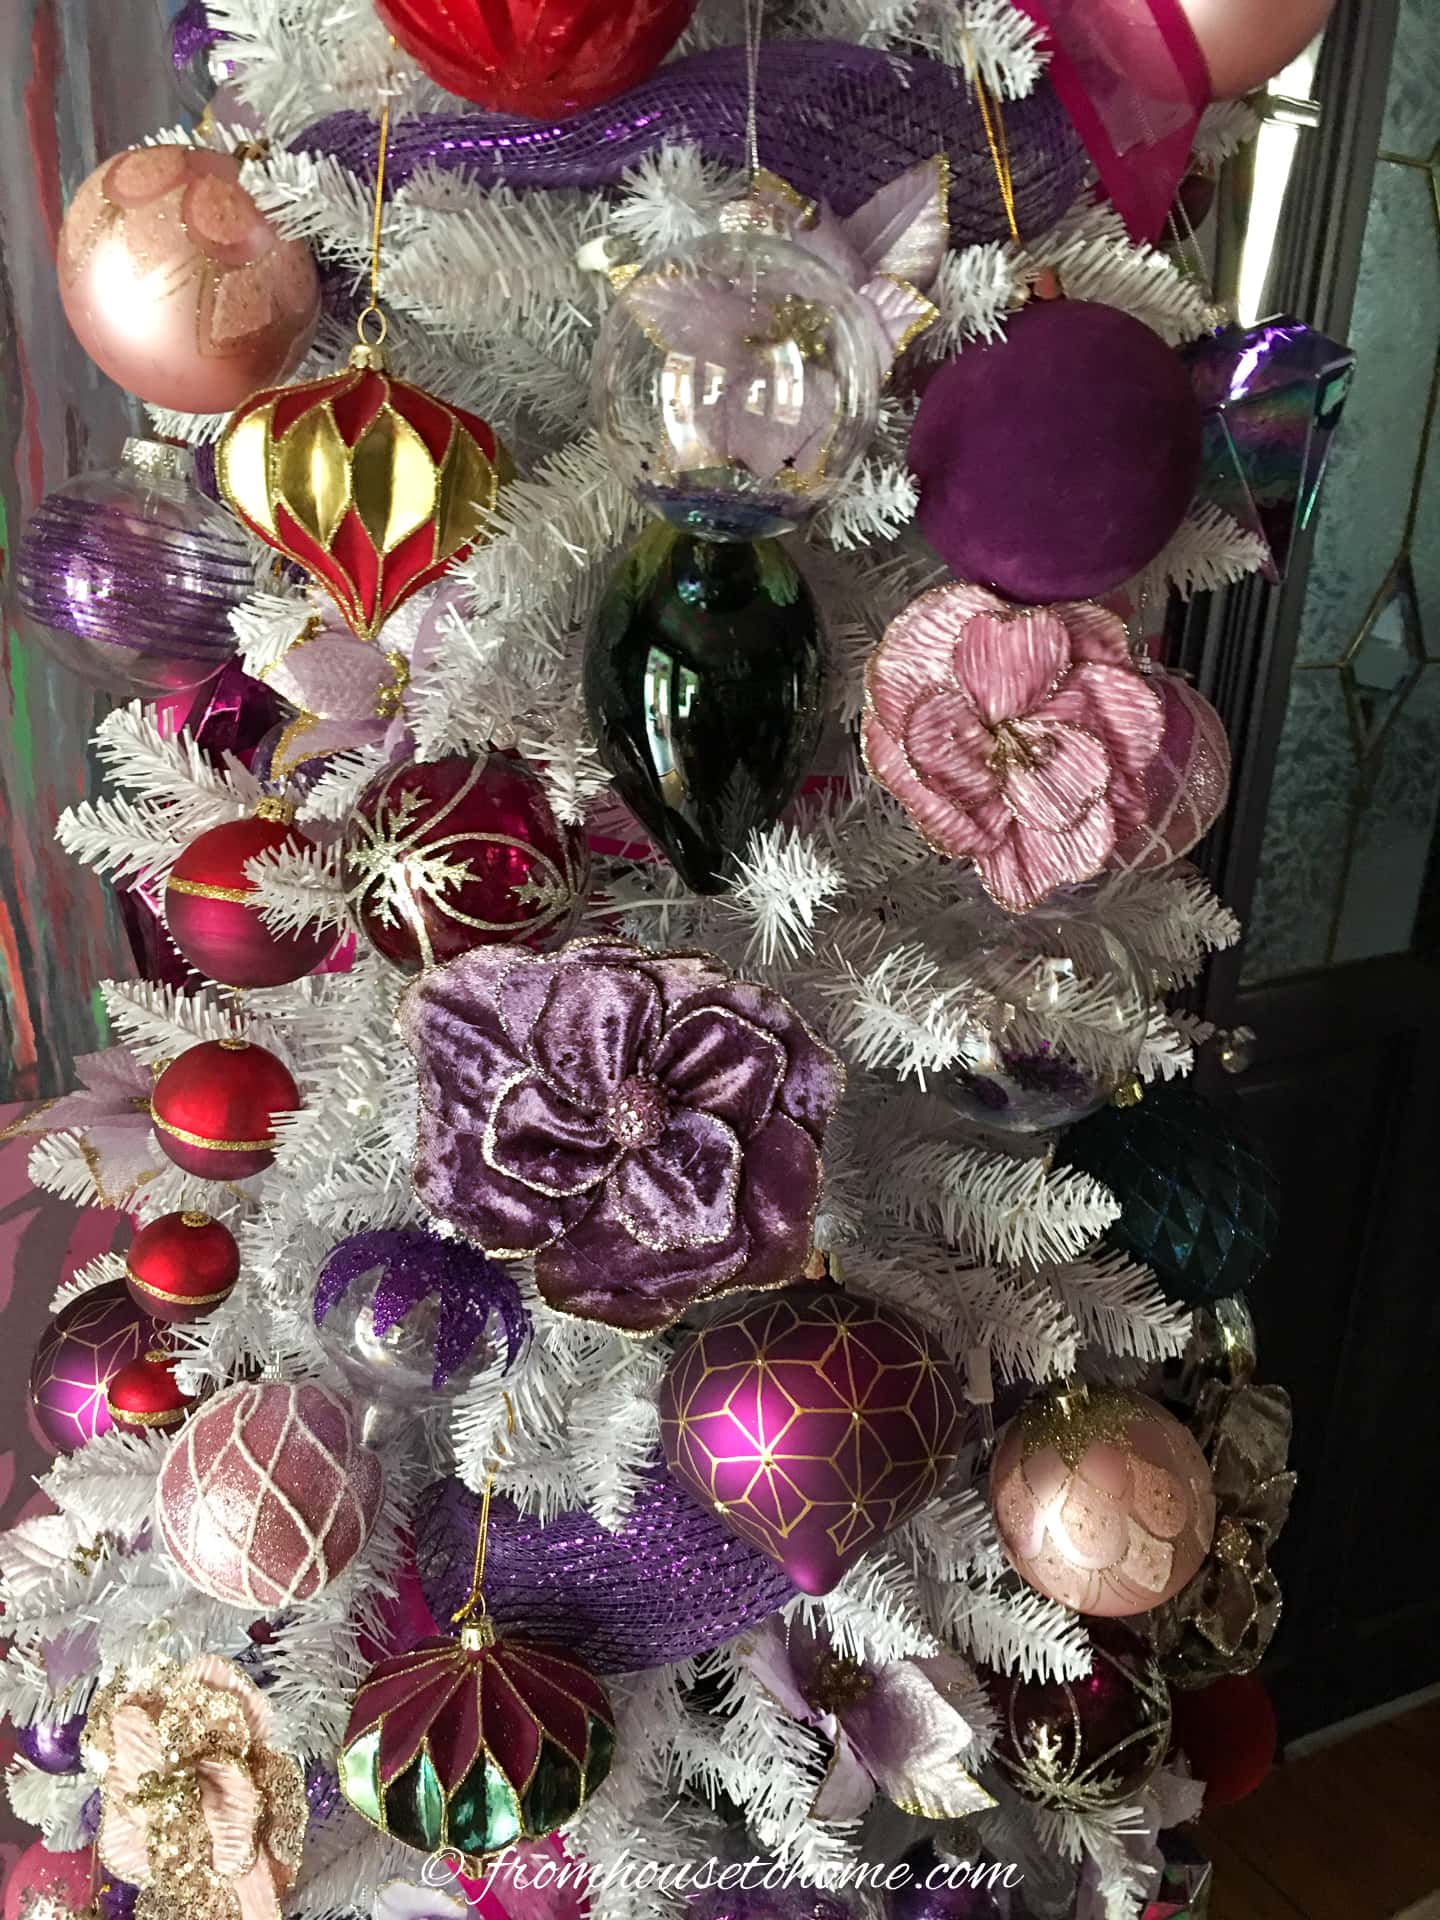 A closeup of a white Christmas tree decorated with purple and pink ball and flower ornaments